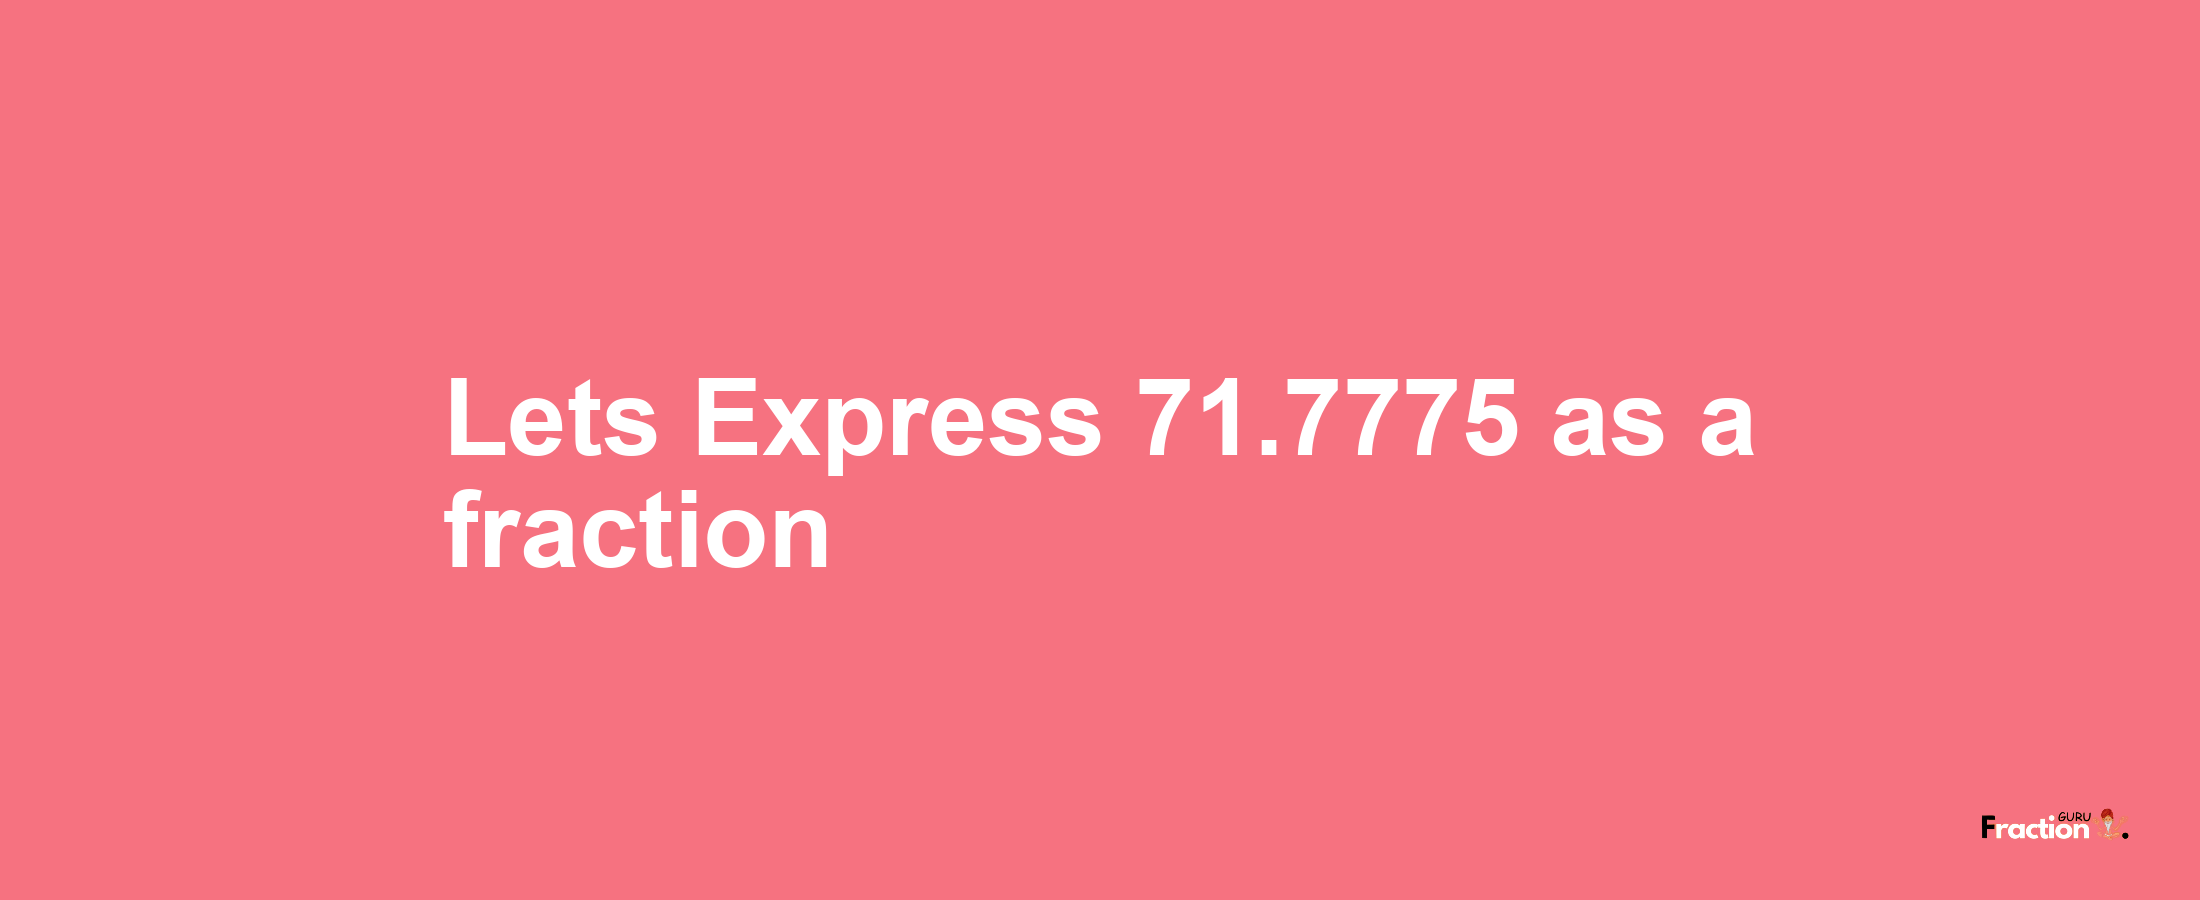 Lets Express 71.7775 as afraction